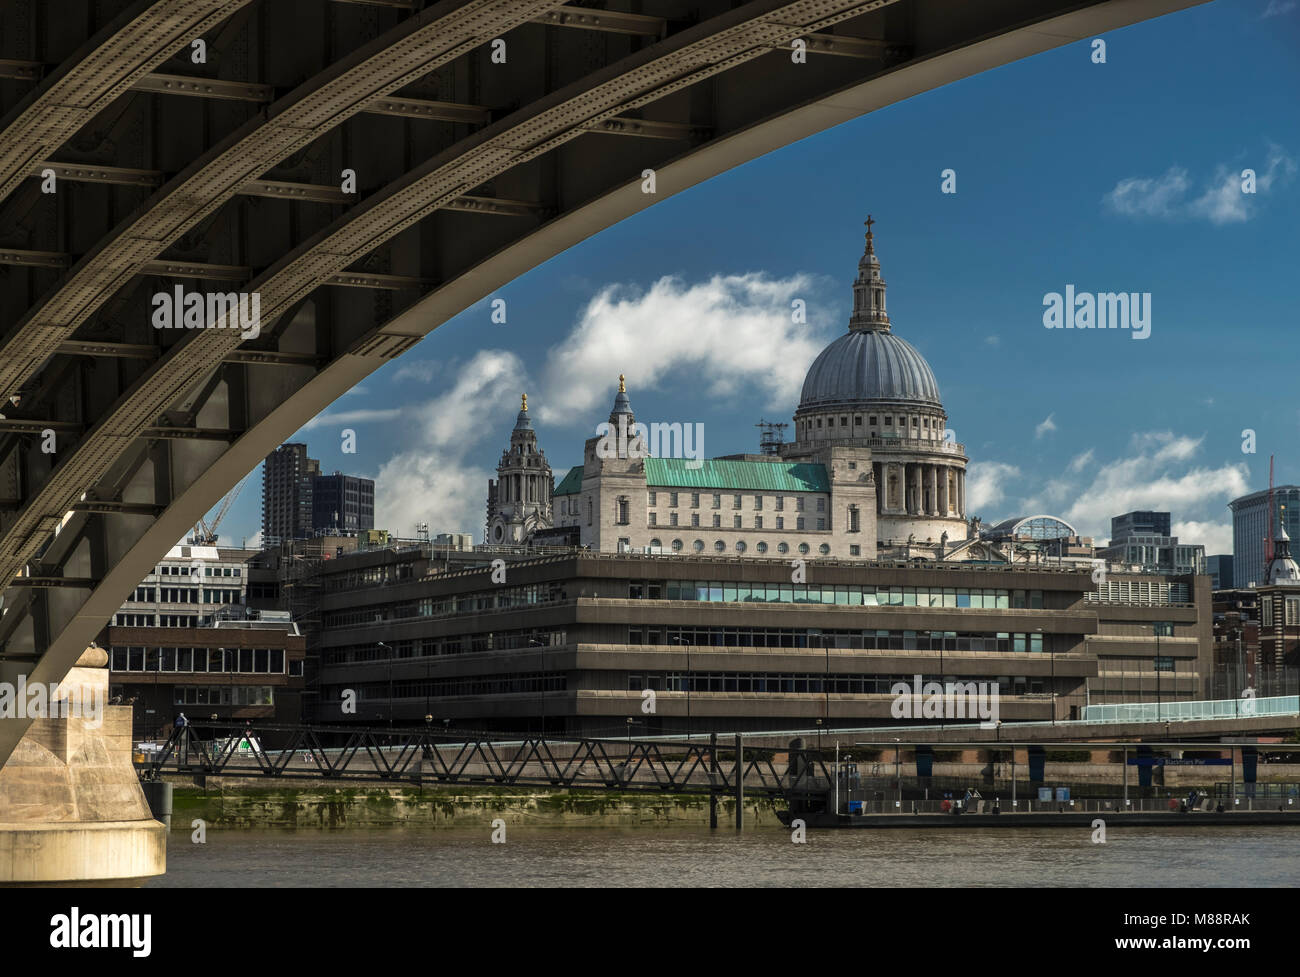 St Pauls Cathedral and the Thames as seen from under the arches of Blackfriars Station. Stock Photo